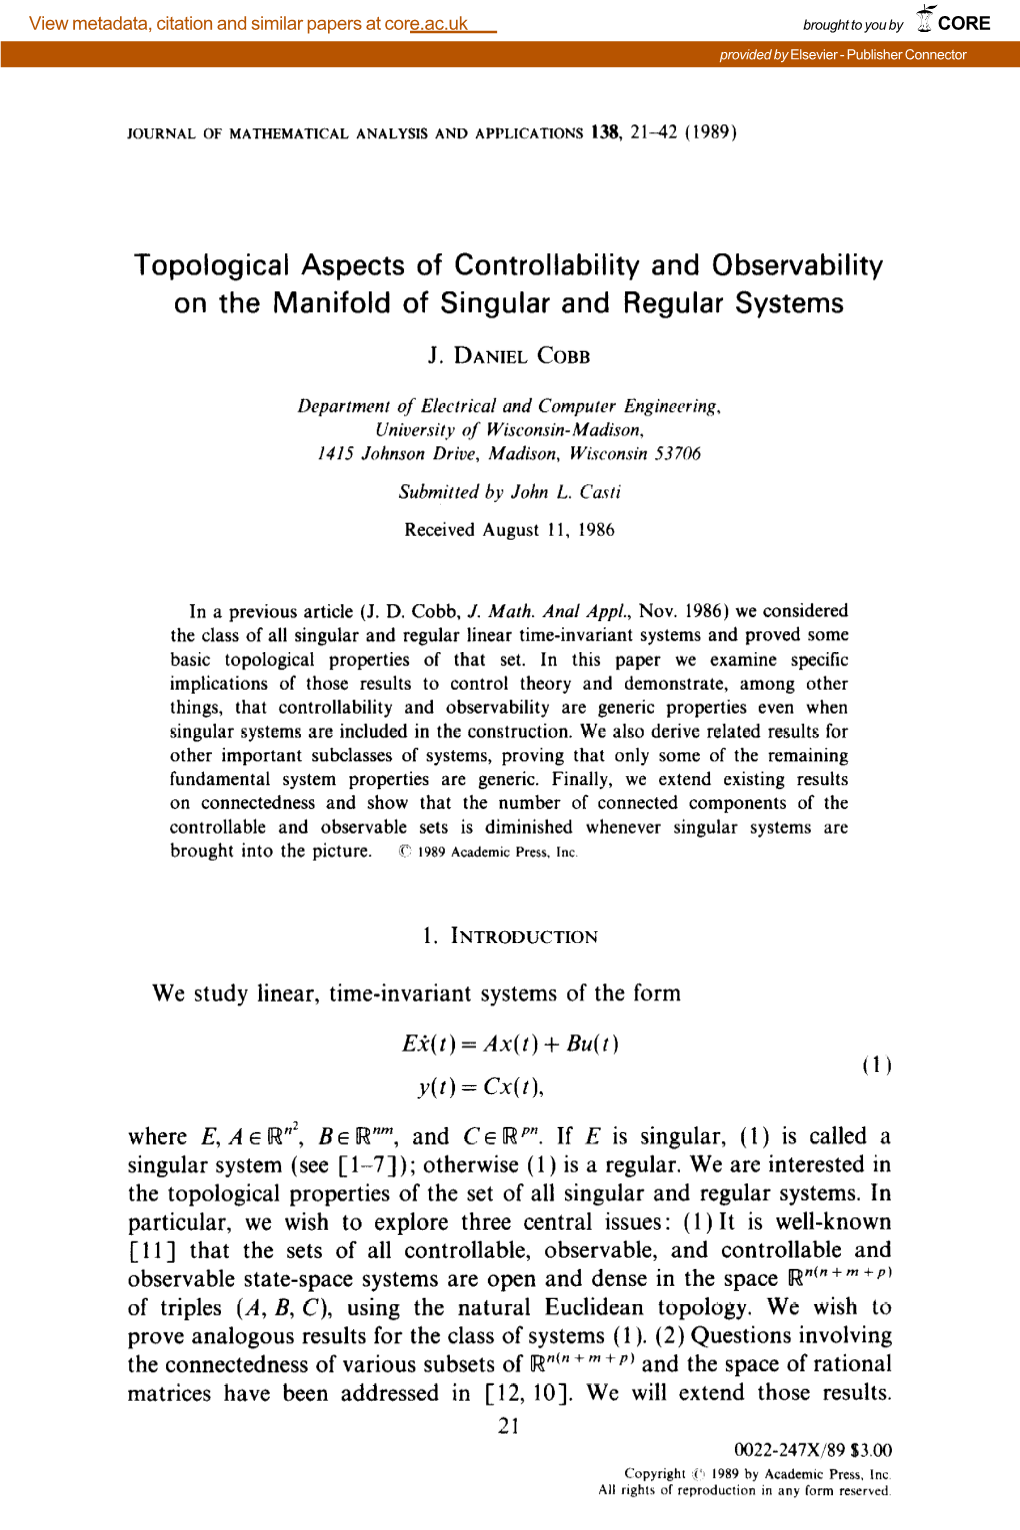 Topological Aspects of Controllability and Observability on the Manifold of Singular and Regular Systems